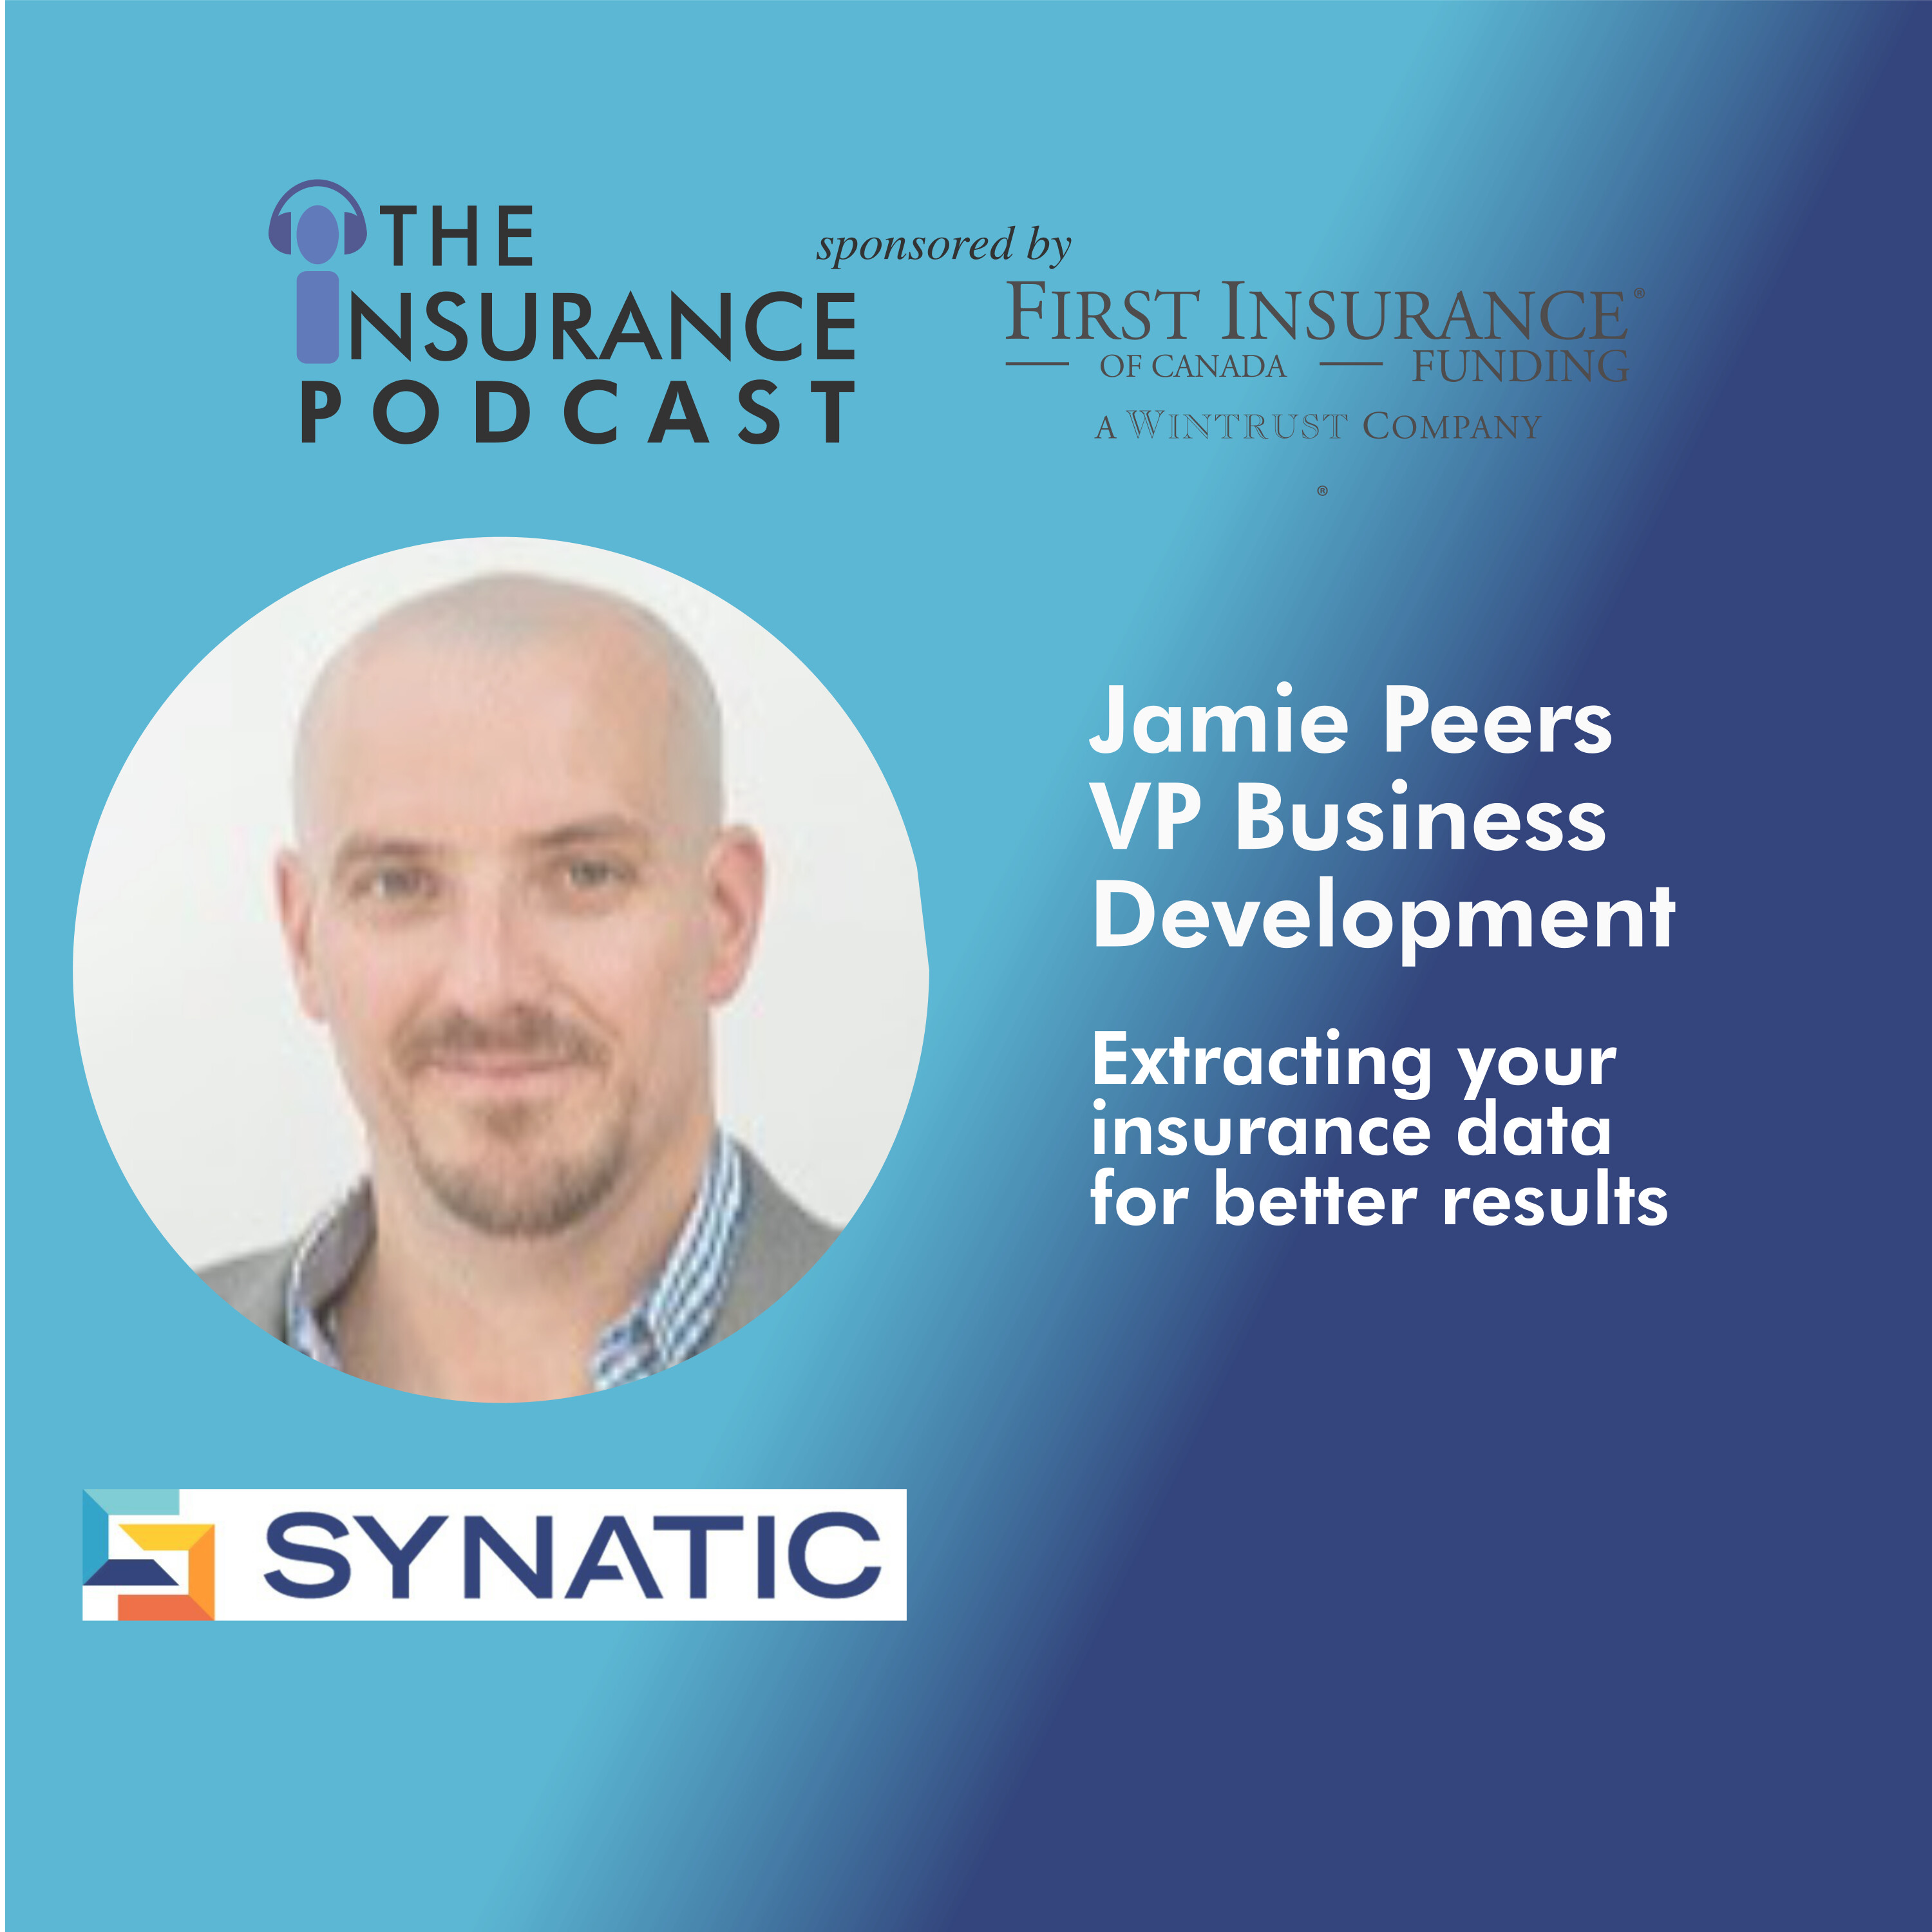 Using your insurance data with Jamie Speers of Synatic Image